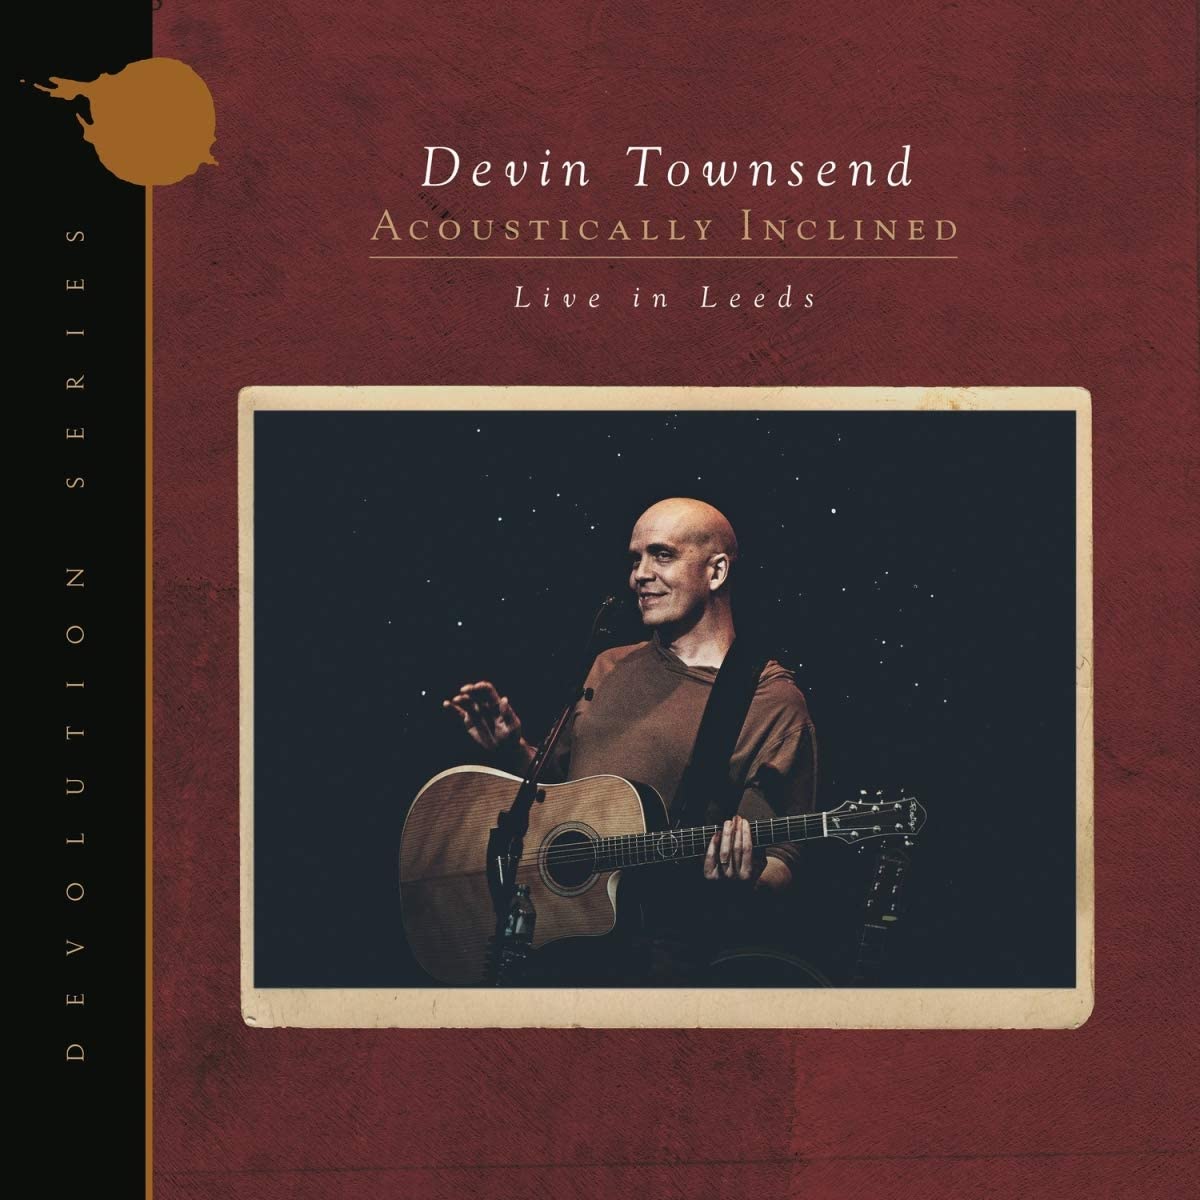 Acoustically Inclined. Live in Leeds - Vinyl | Devin Townsend